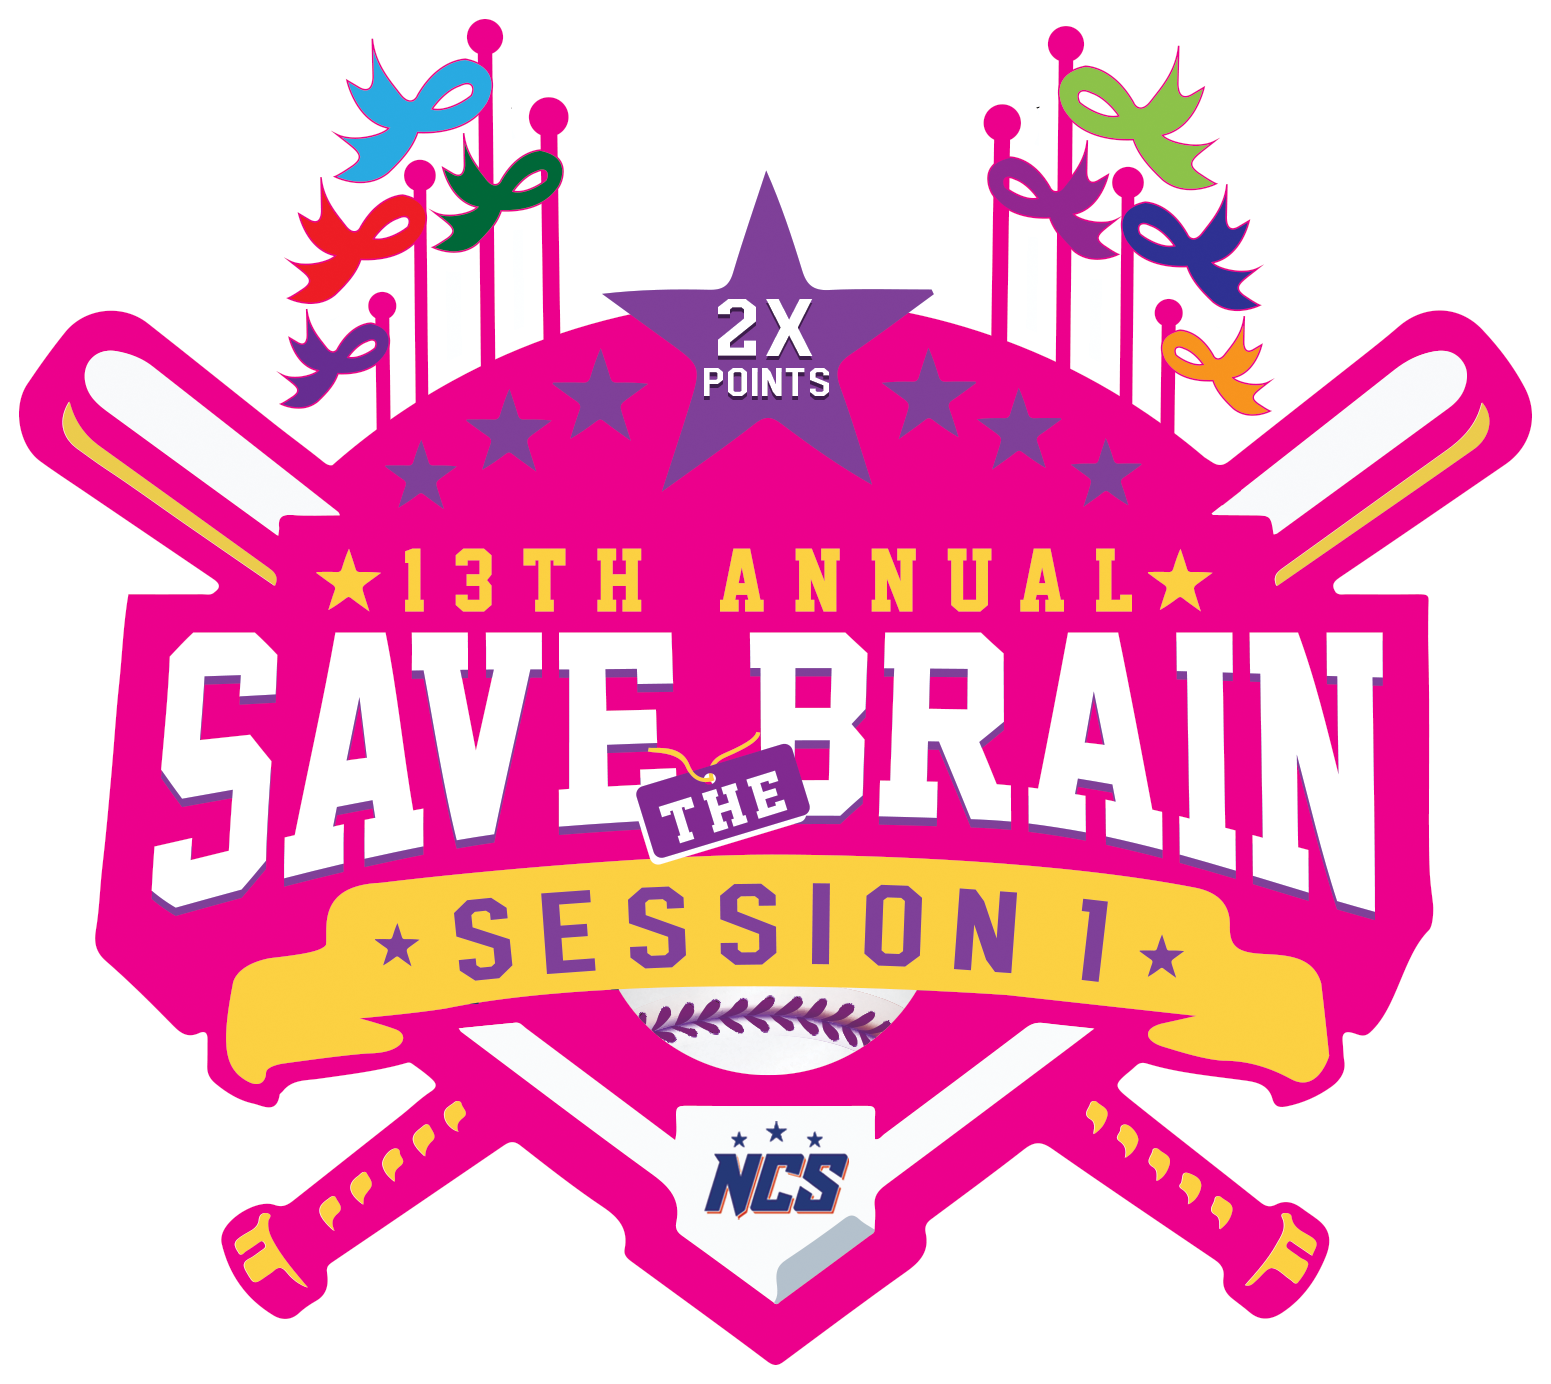 13th Annual Save the Brain Session 1 2x points Hosted by:CSULB Head Coach Eric Valenzuela Logo